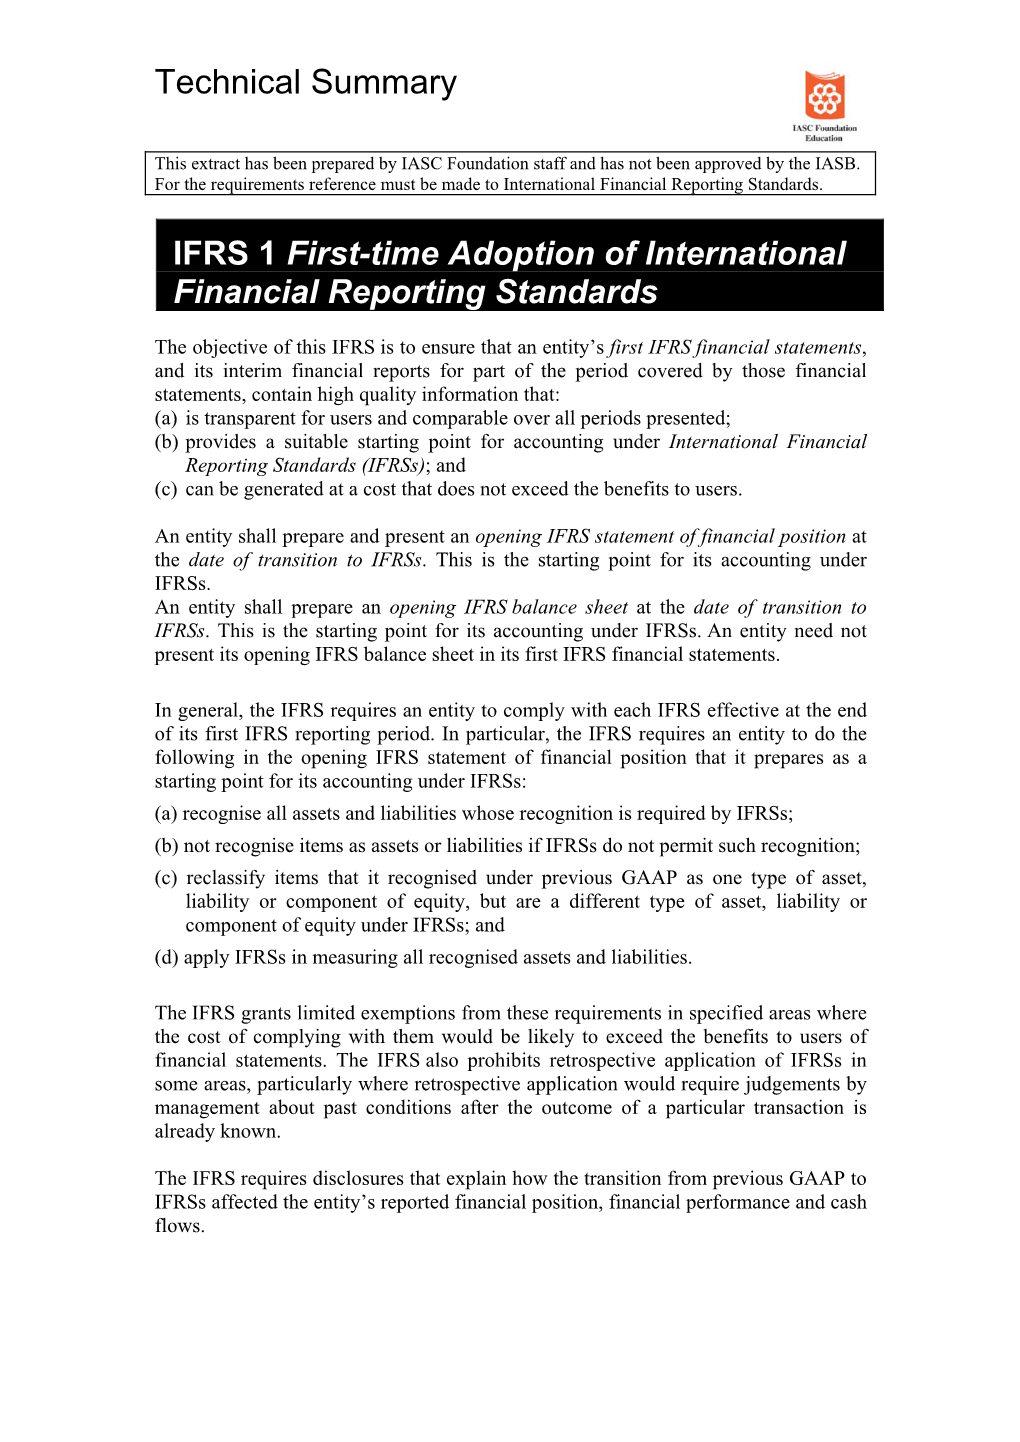 IFRS 1 First-Time Adoption of International Financial Reporting Standards